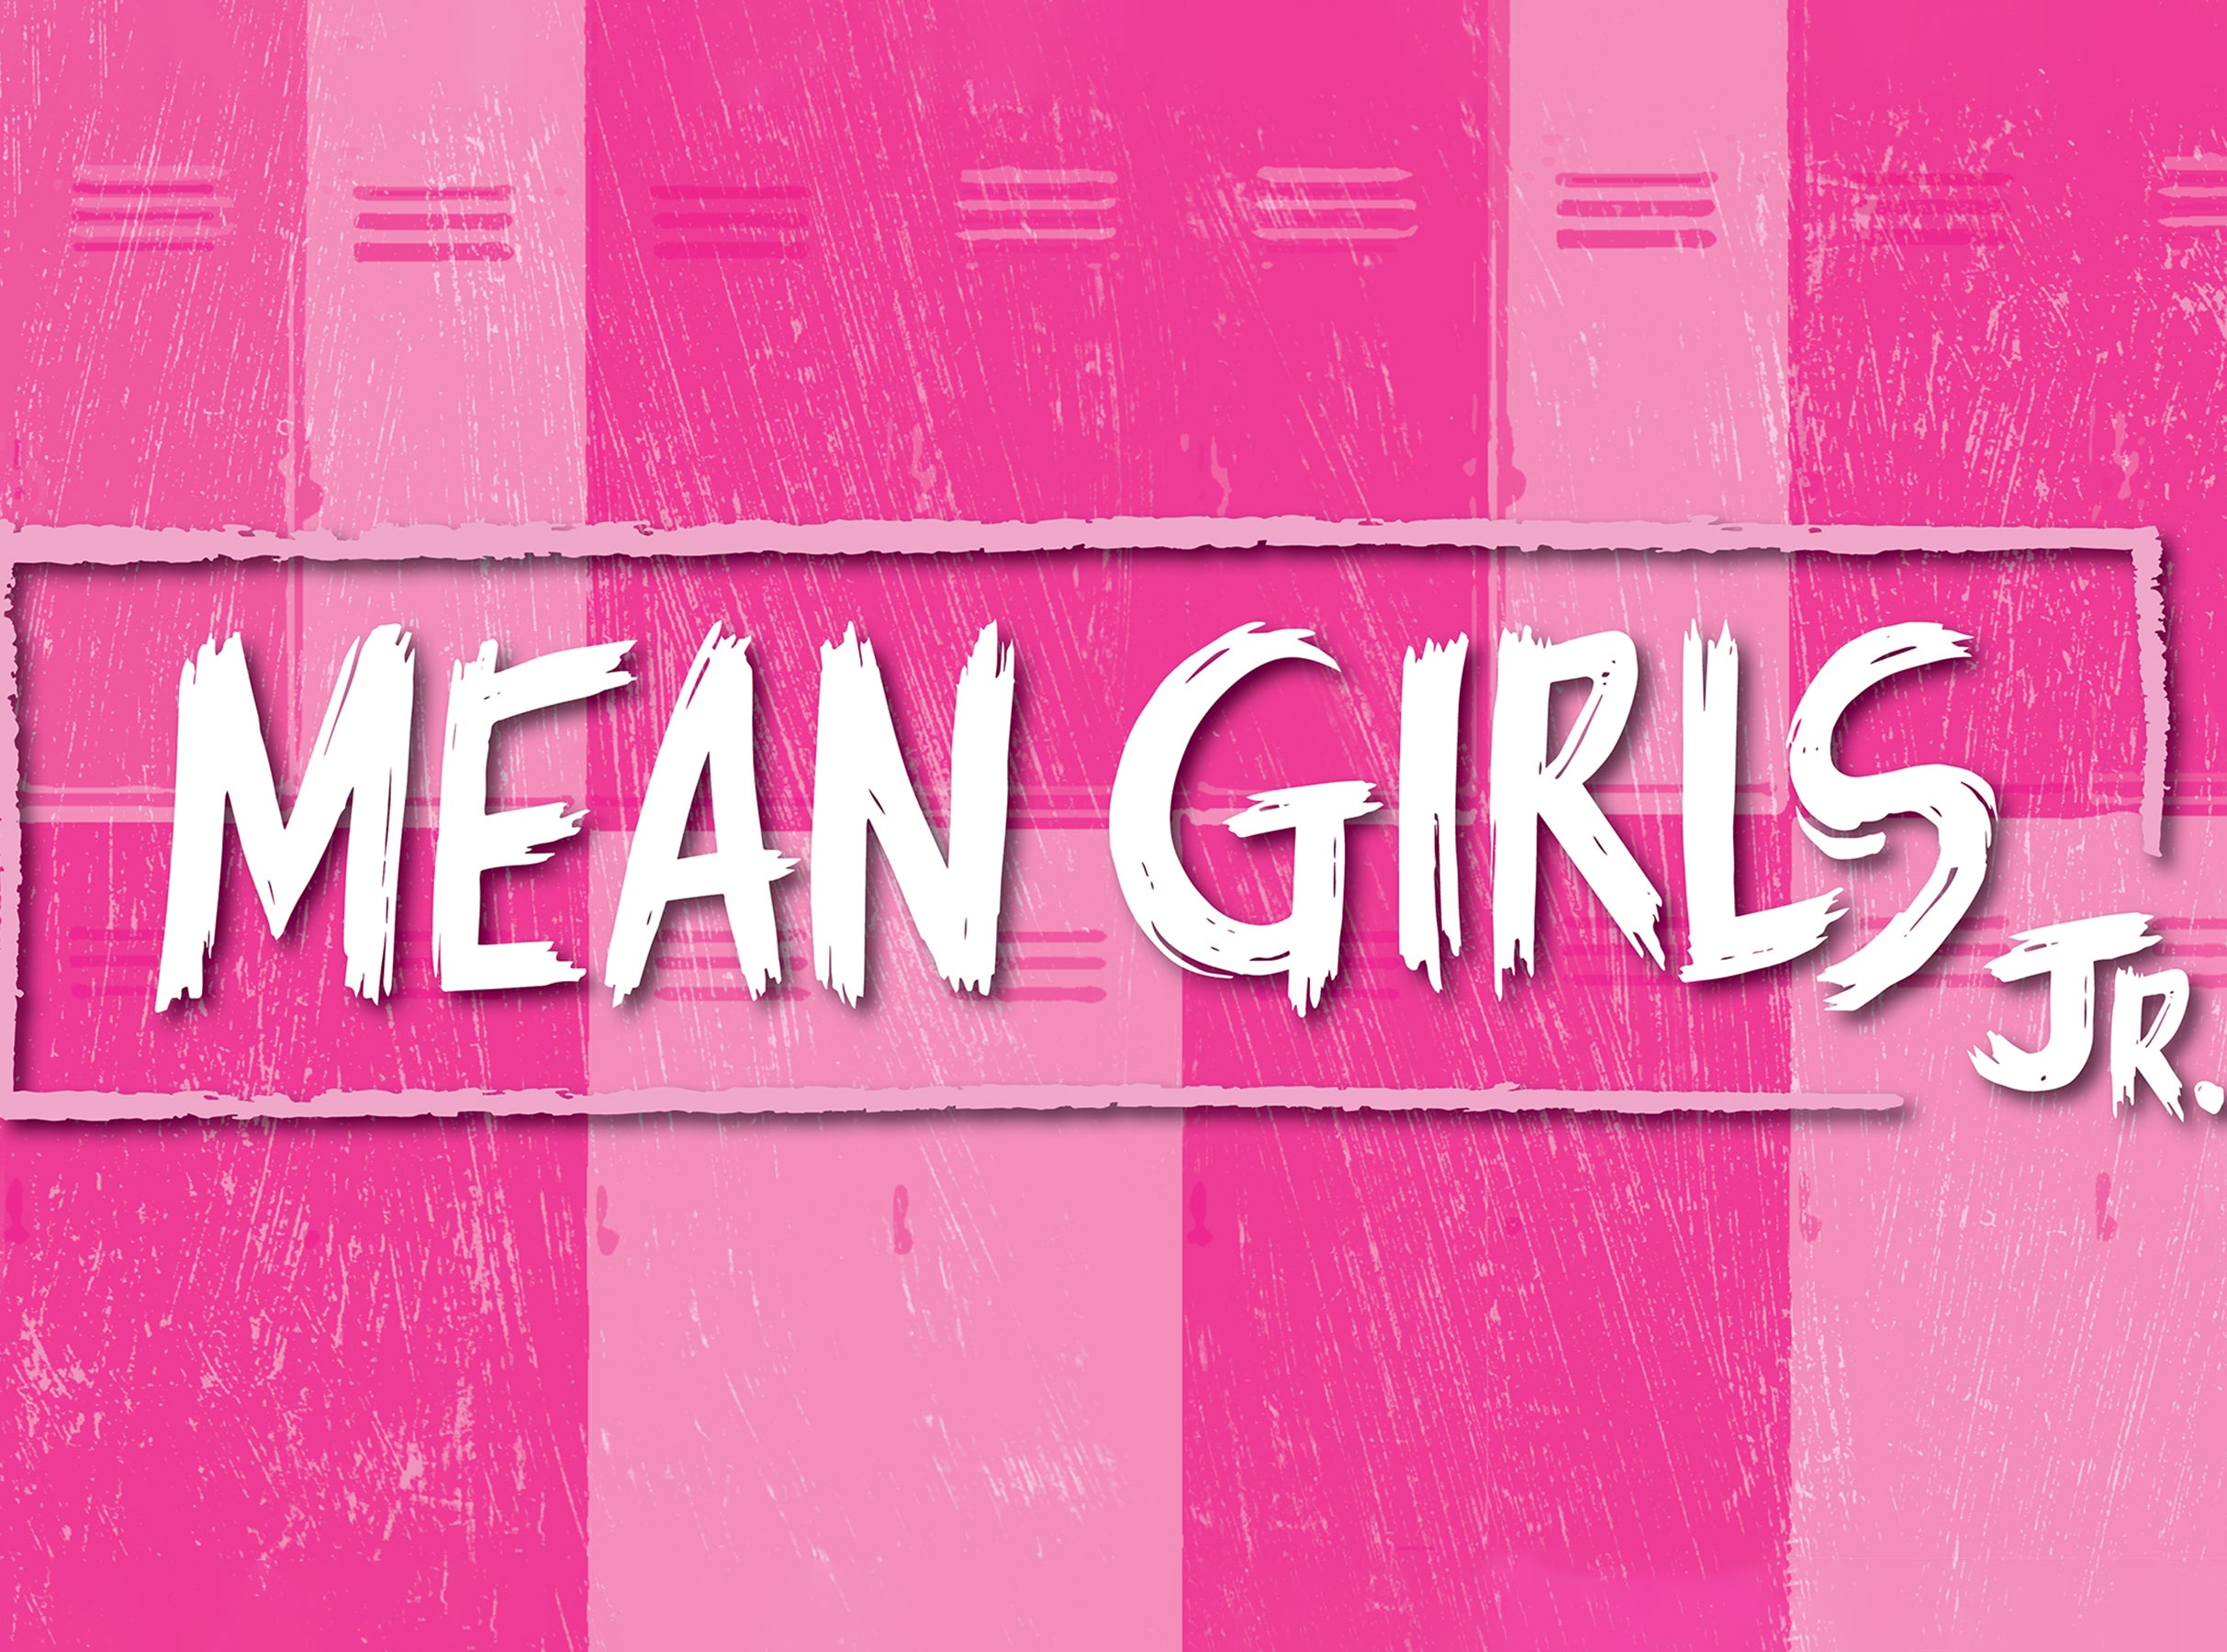 Mean Girls Jr. at The Maryland Theatre